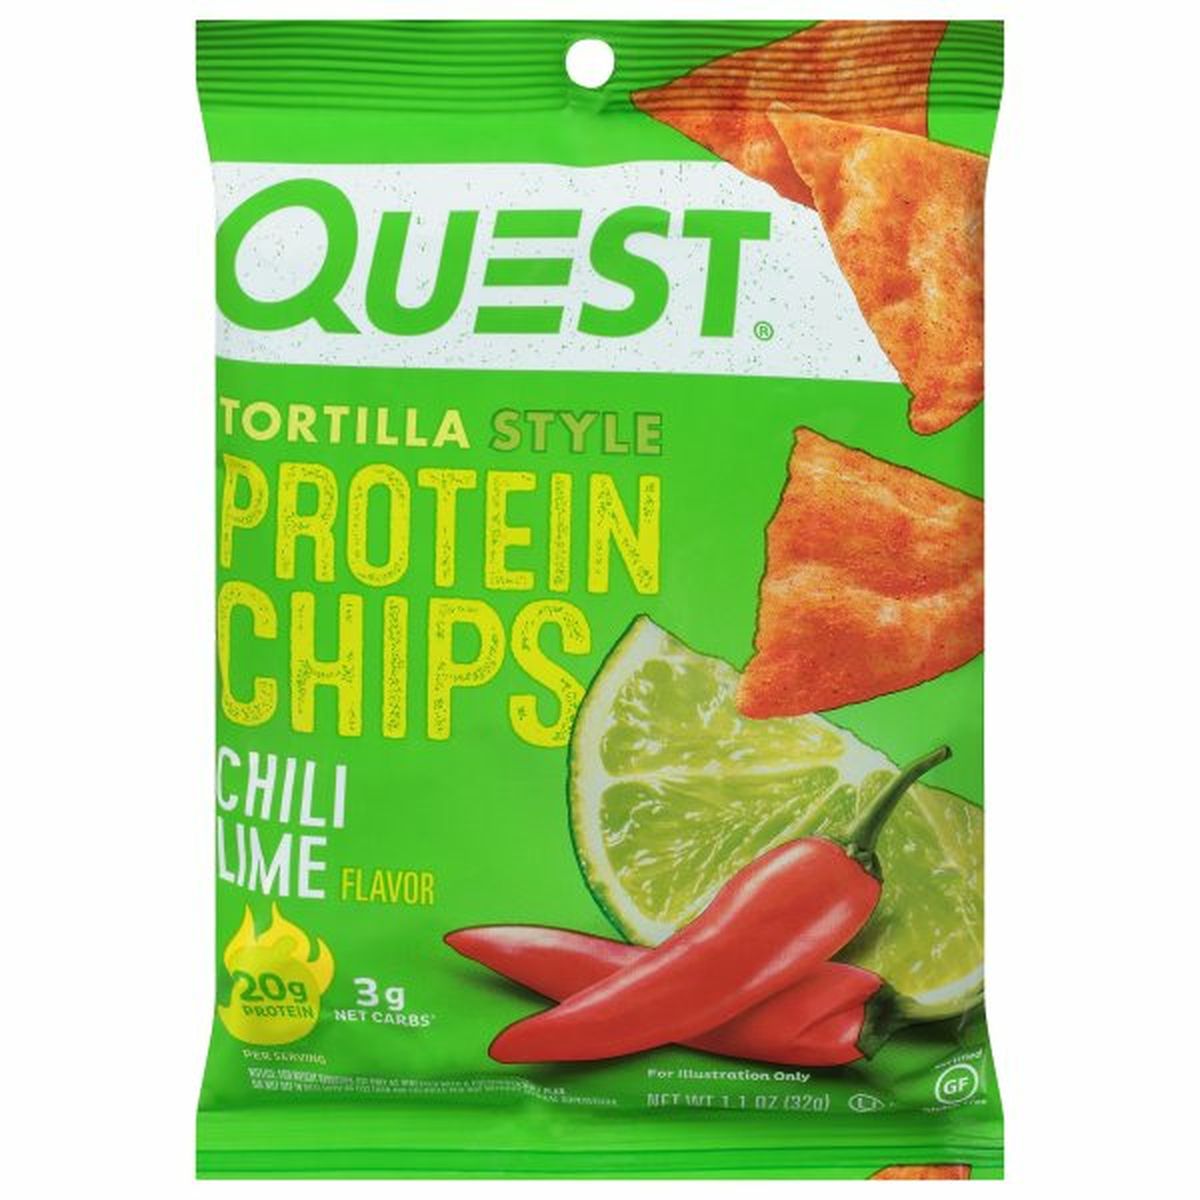 Calories in Quest Protein Chips, Tortilla Style, Chili Lime Flavor